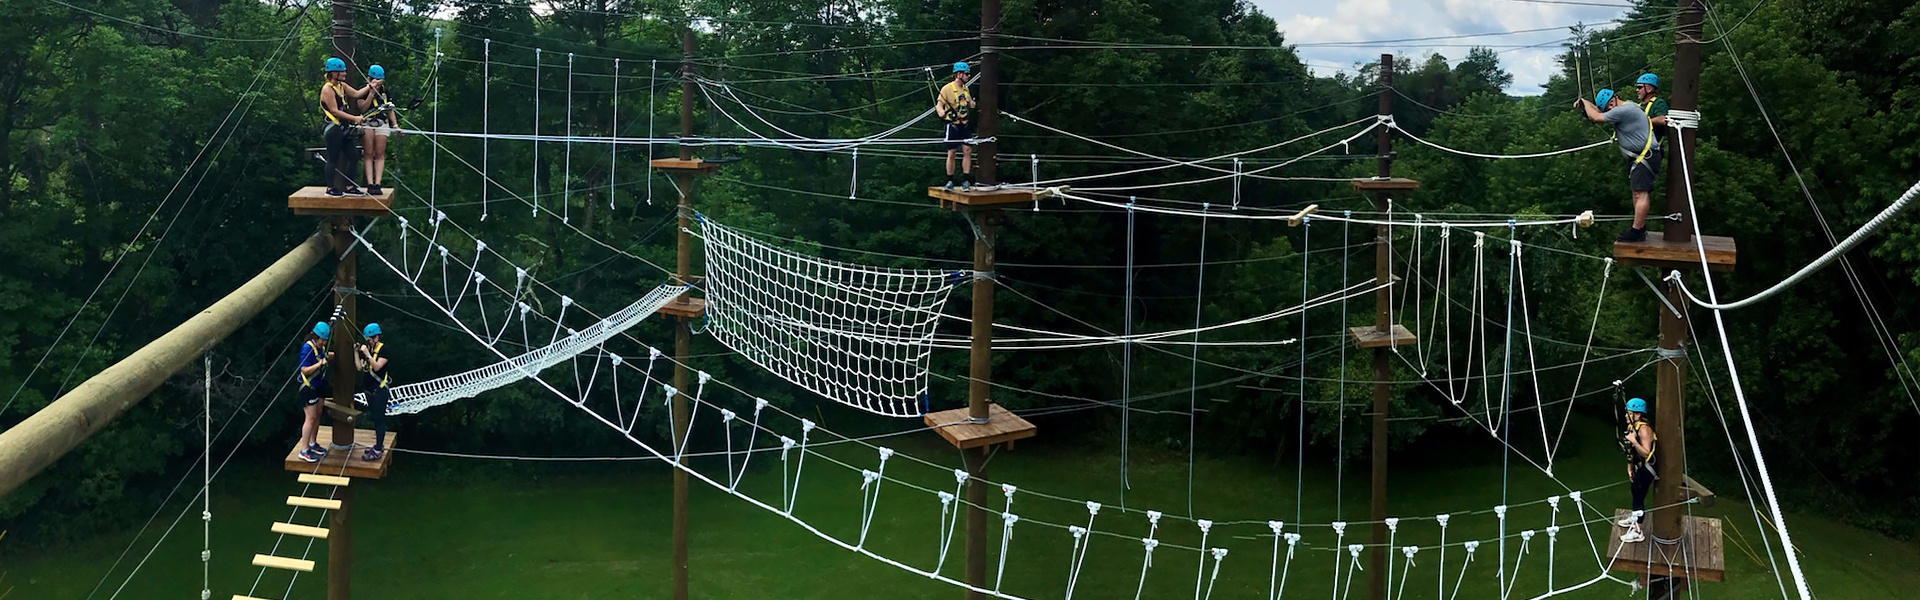 Outdoor Community Ropes Course